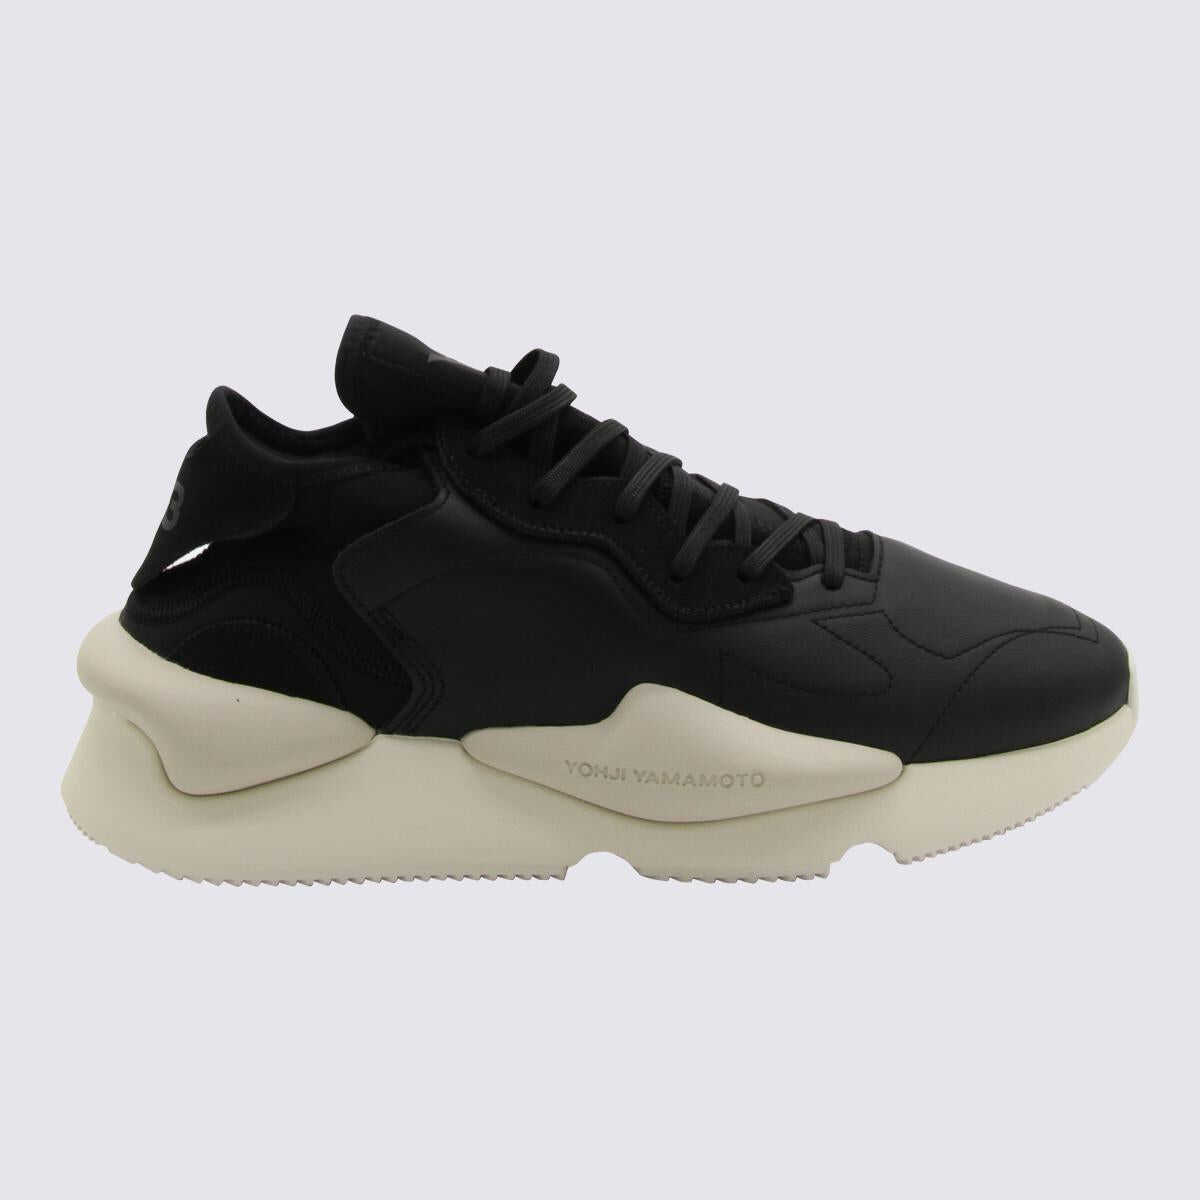 Y-3 Y-3 BLACK AND WHITE LEATHER KAIWA SNEAKERS BLACK/OFF WHITE/CLEAR BROWN